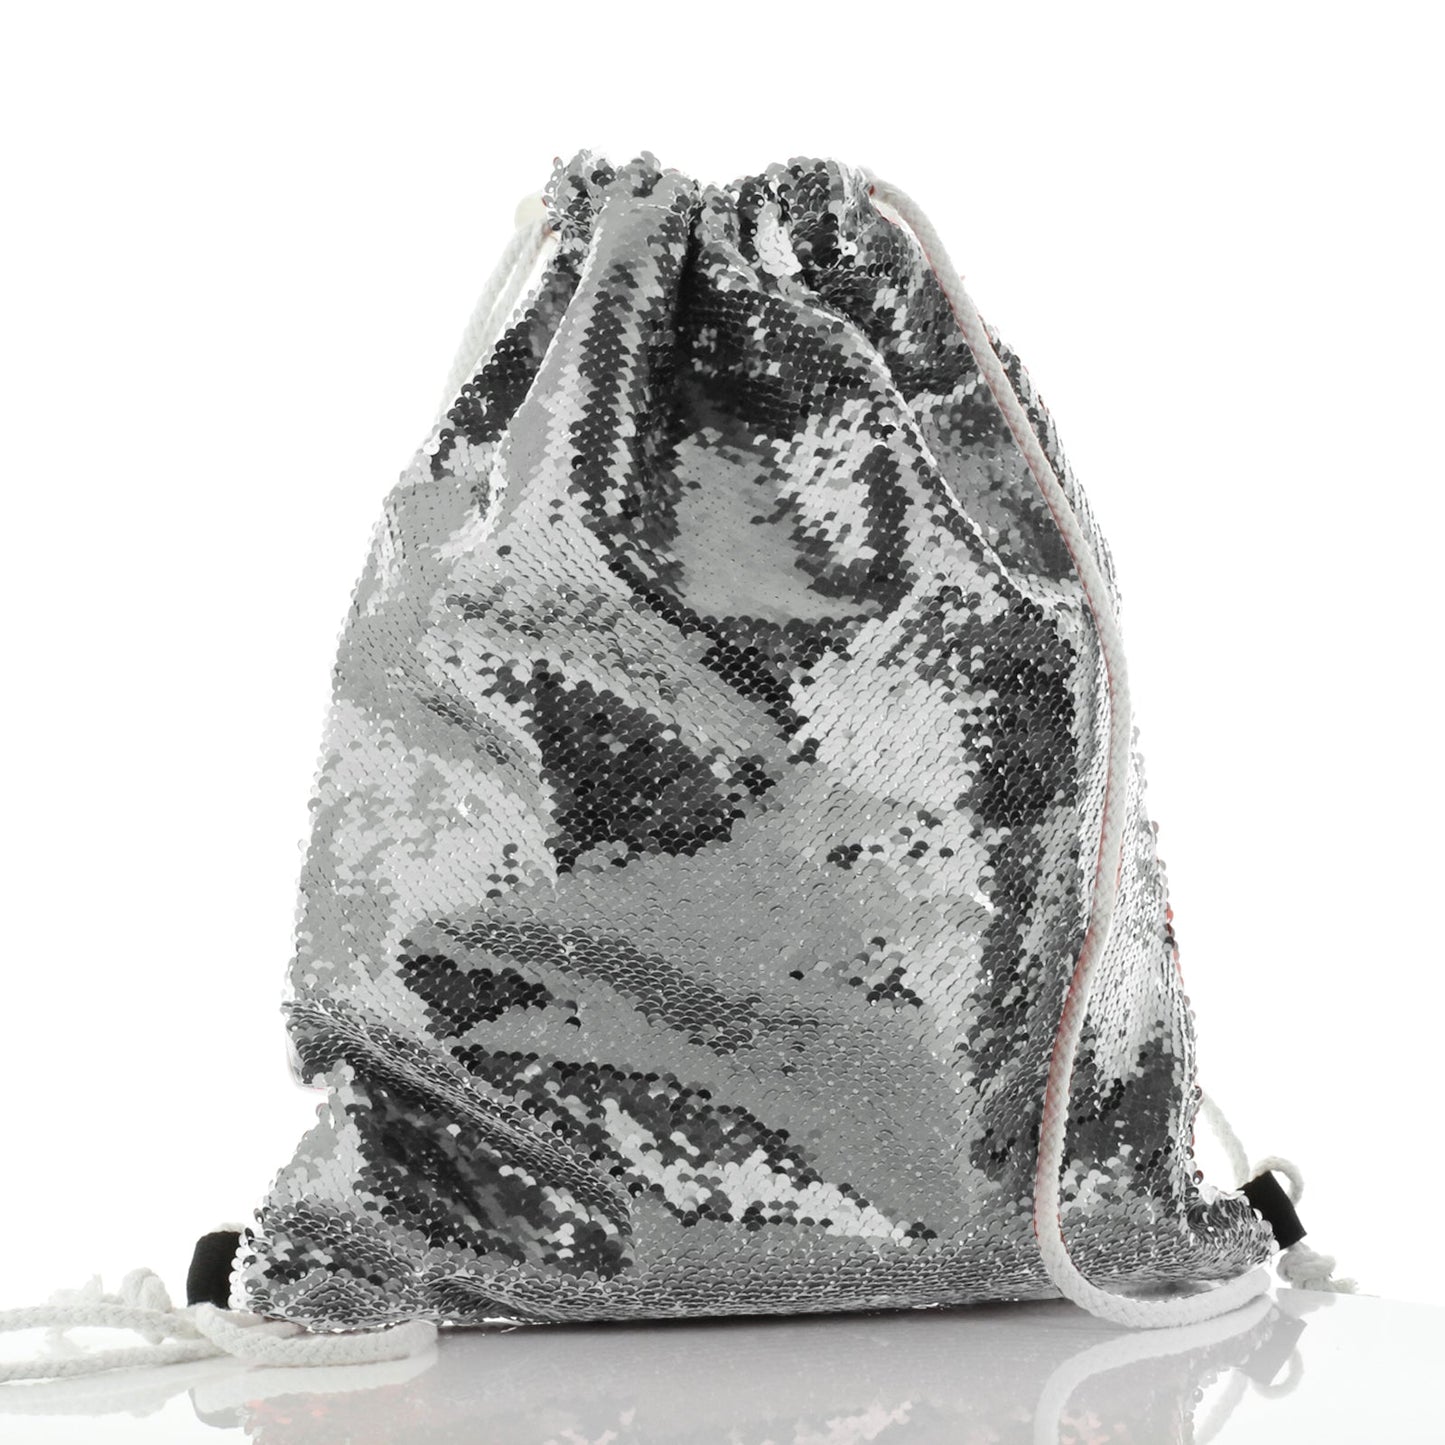 Personalised Sequin Drawstring Backpack with Stylish Text and Arrow Love Hearts Print